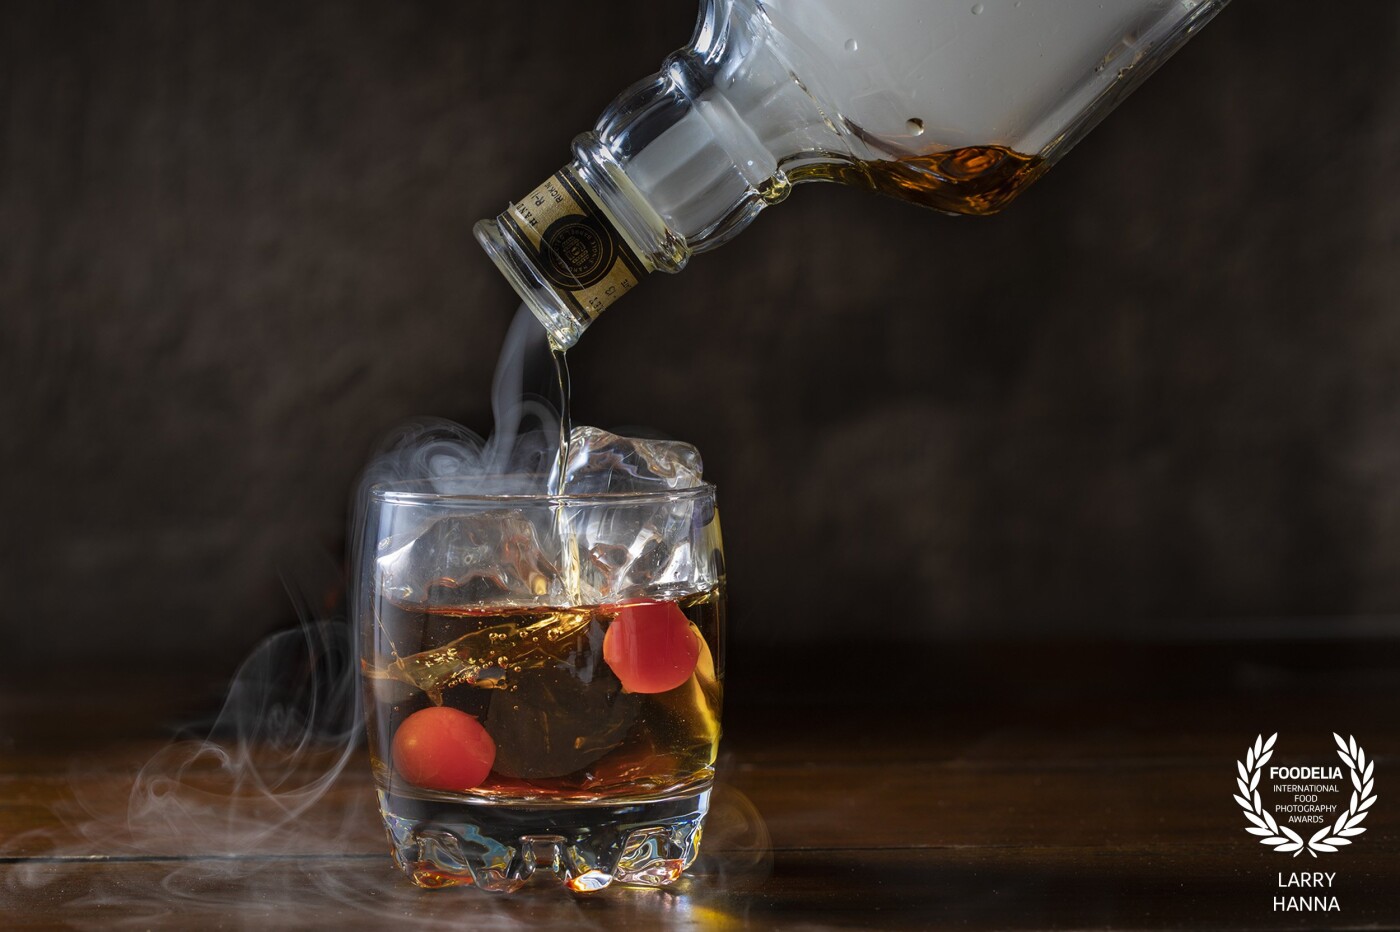 I recently saw someone in a bar being served a smoked Manhattan and was mesmerized by the presentation.  I did a little research and made my own in the studio using a strobe light to freeze the flowing smoke.  Tasted pretty good, also.